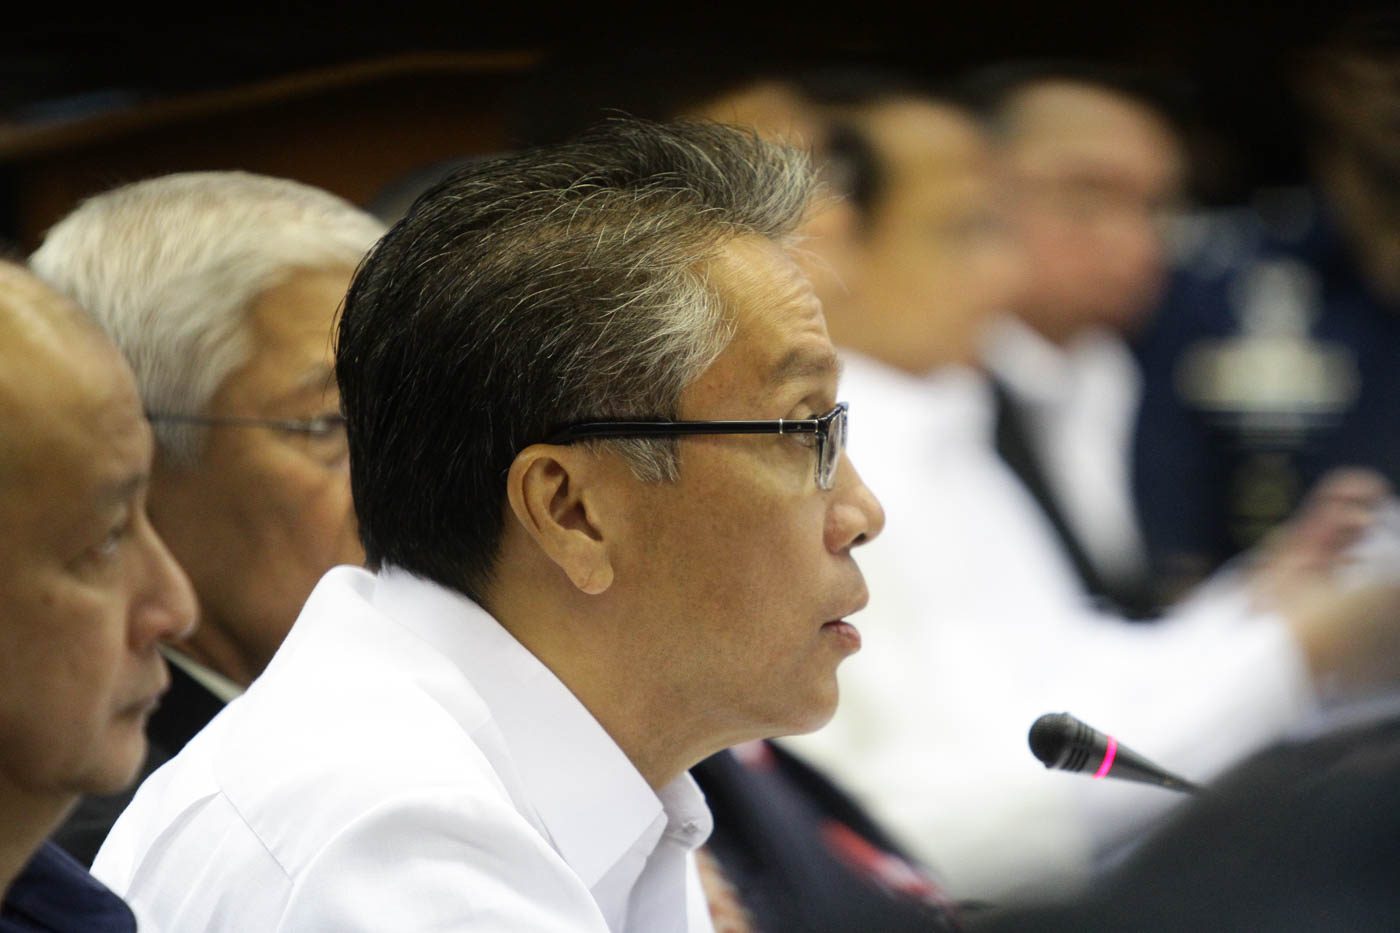 Did security cluster lie about Aquino under oath?